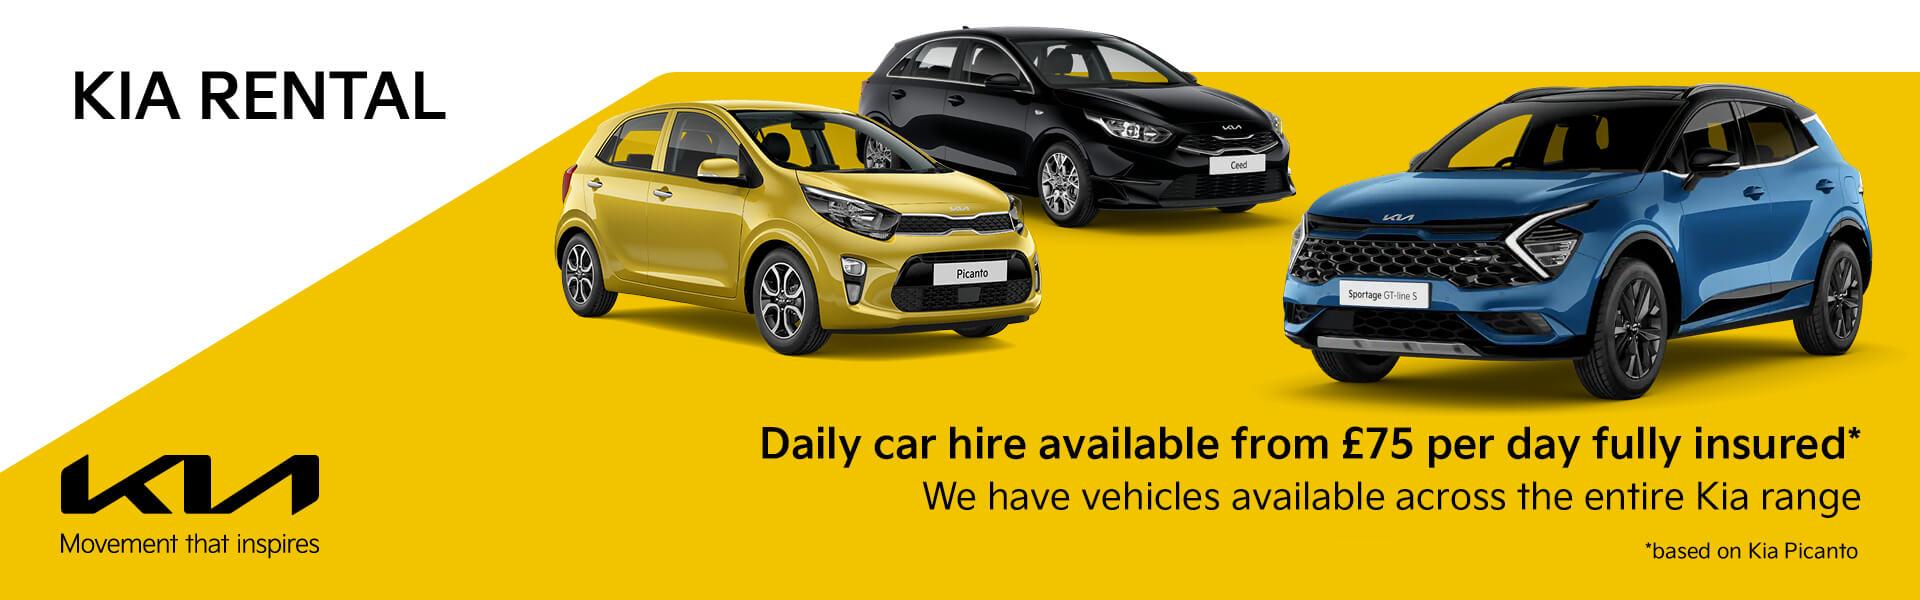 Kia Rental: Daily car hire available from £75 per day fully insured (based on Kia Picanto). We have vehicles available across the entire Kia range.